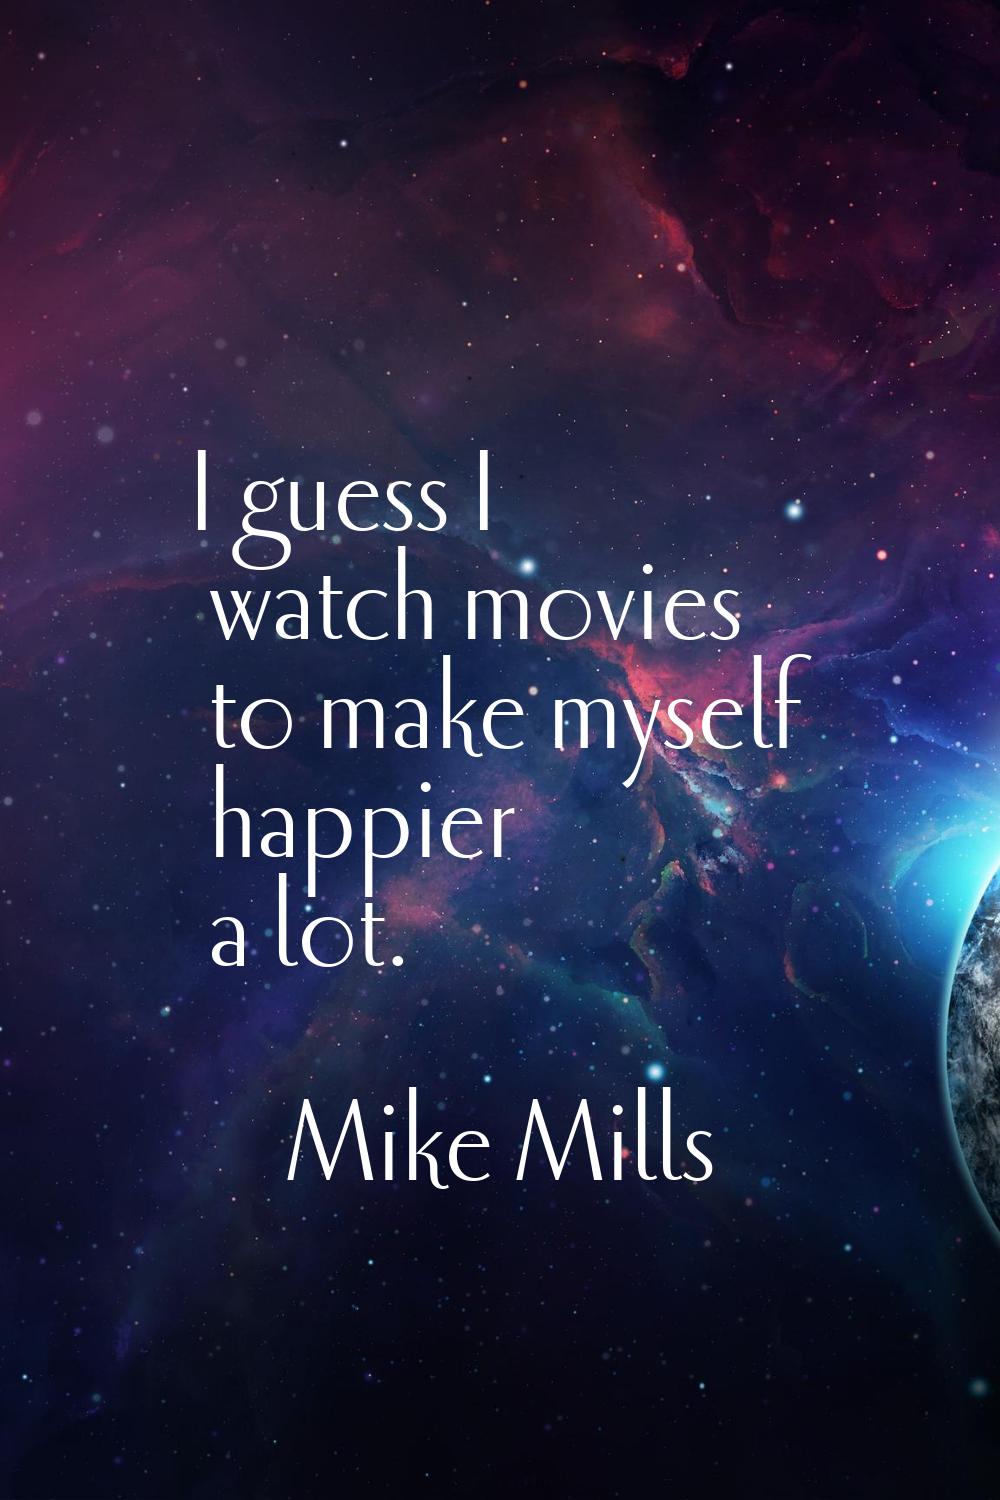 I guess I watch movies to make myself happier a lot.